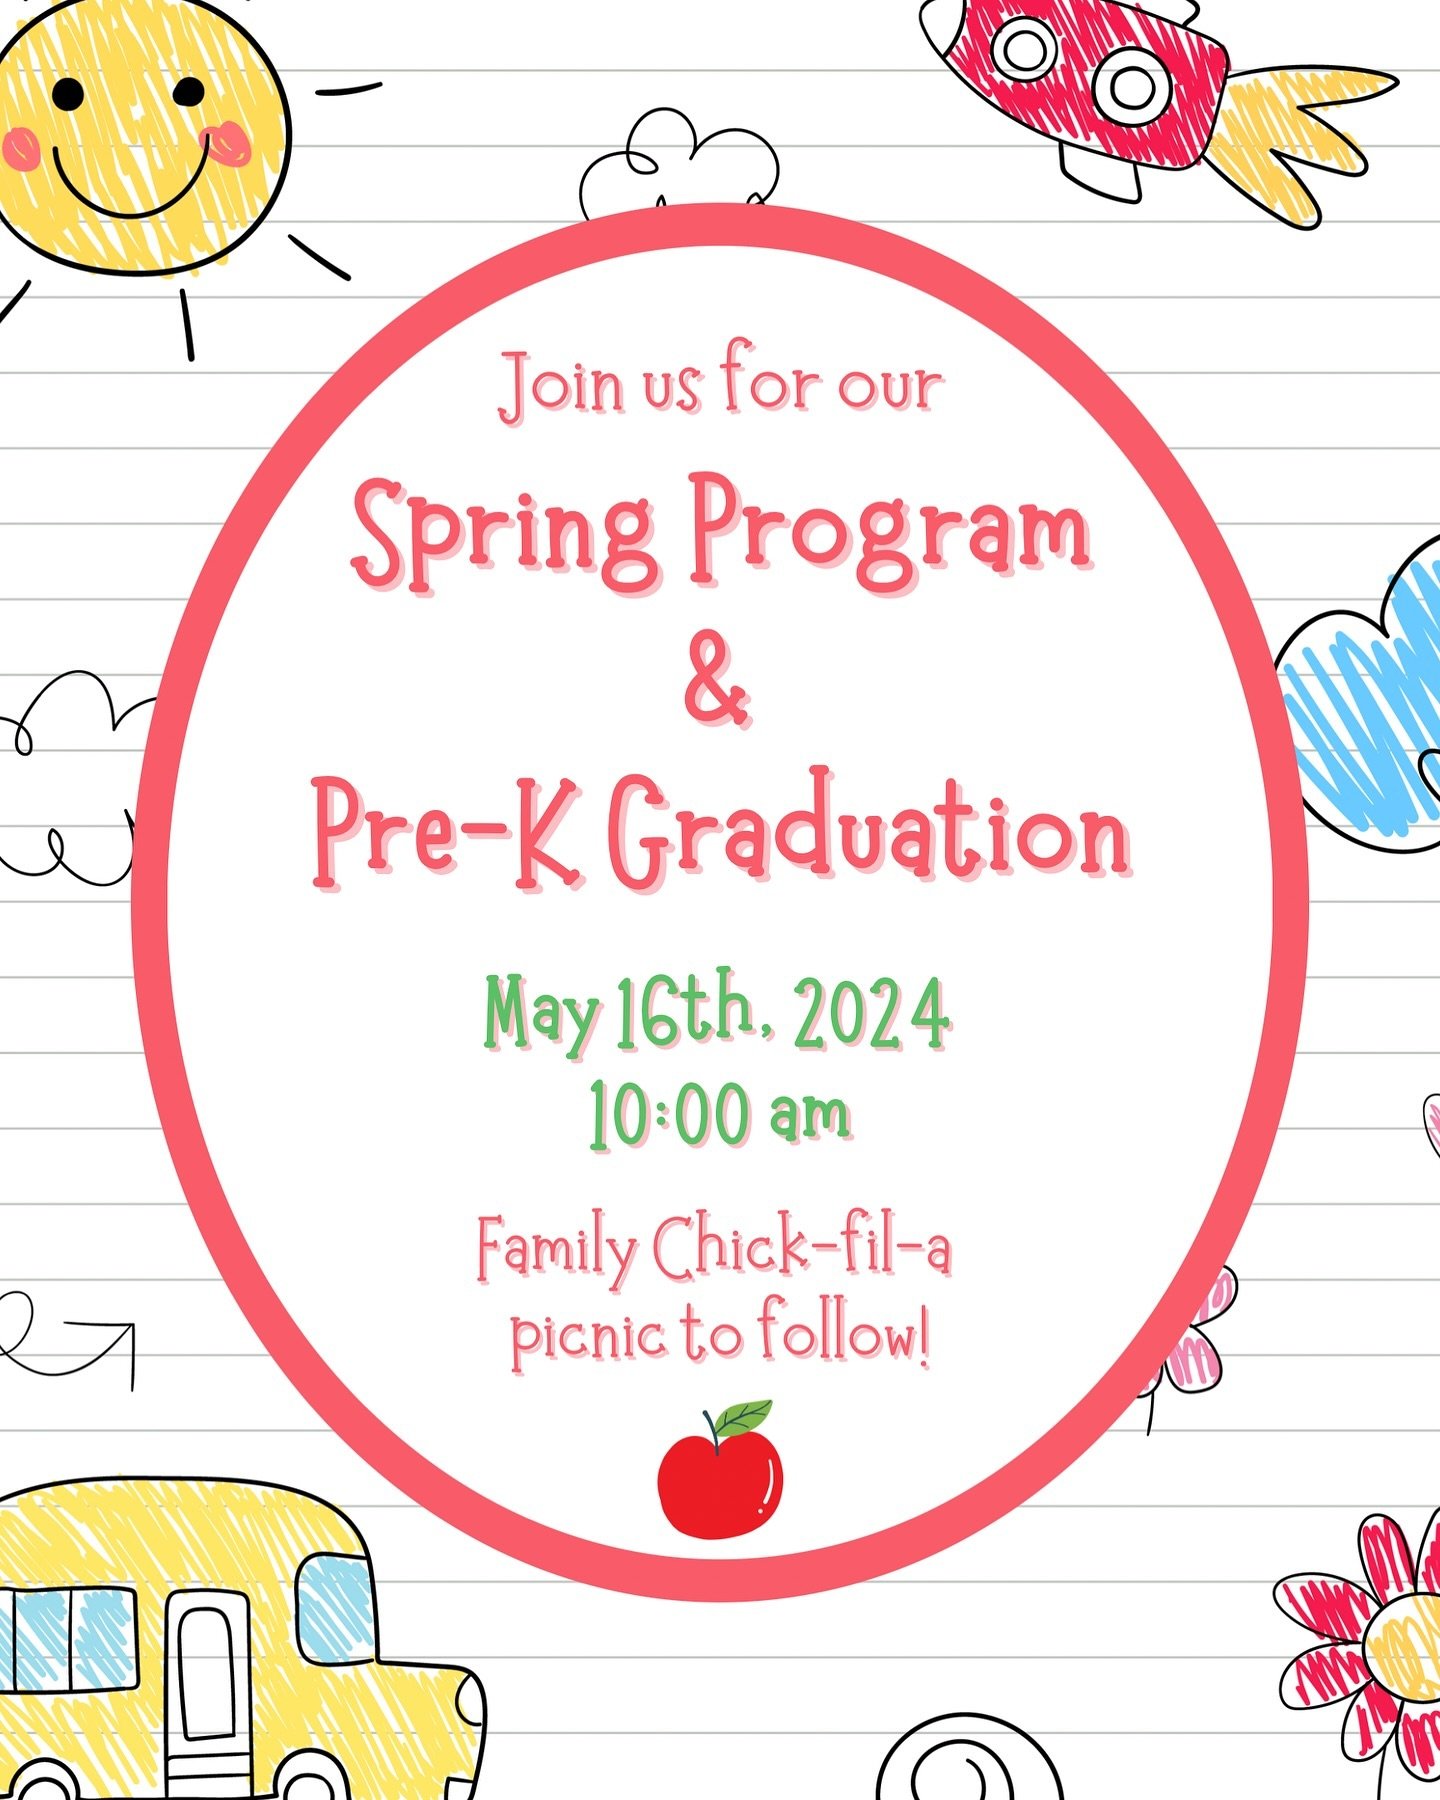 Save the Date! 

Can you believe we&rsquo;re nearing the end of the school year!? Join us for a fun Spring performance from all of our classes plus our Pre-K graduation 🎓